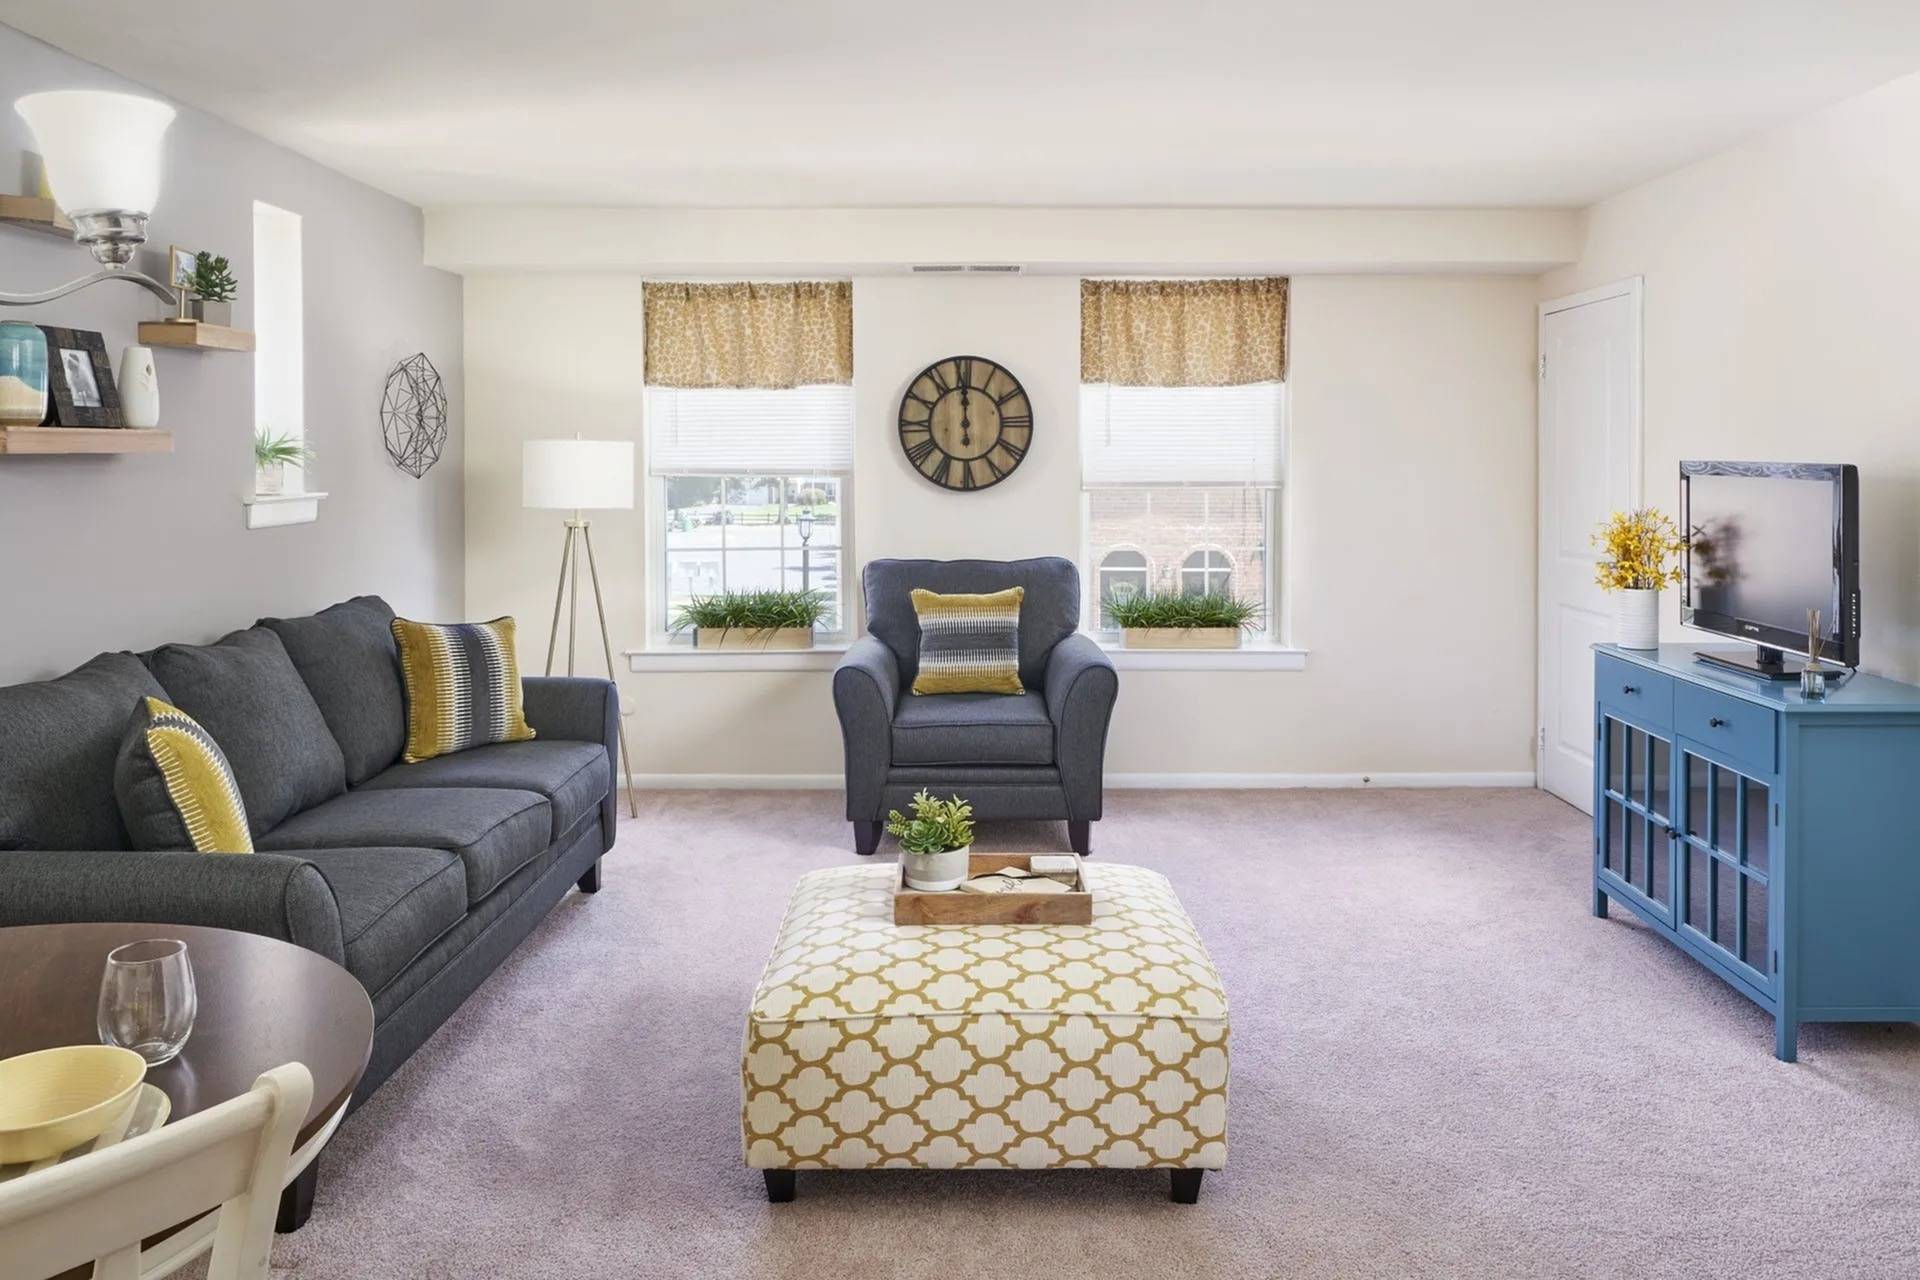 Pet Friendly Apartments in Bensalem PA - Village Square - A Bright And Spacious Living Room With Plush Carpeting, Multiple Windows, And An Accent Wall